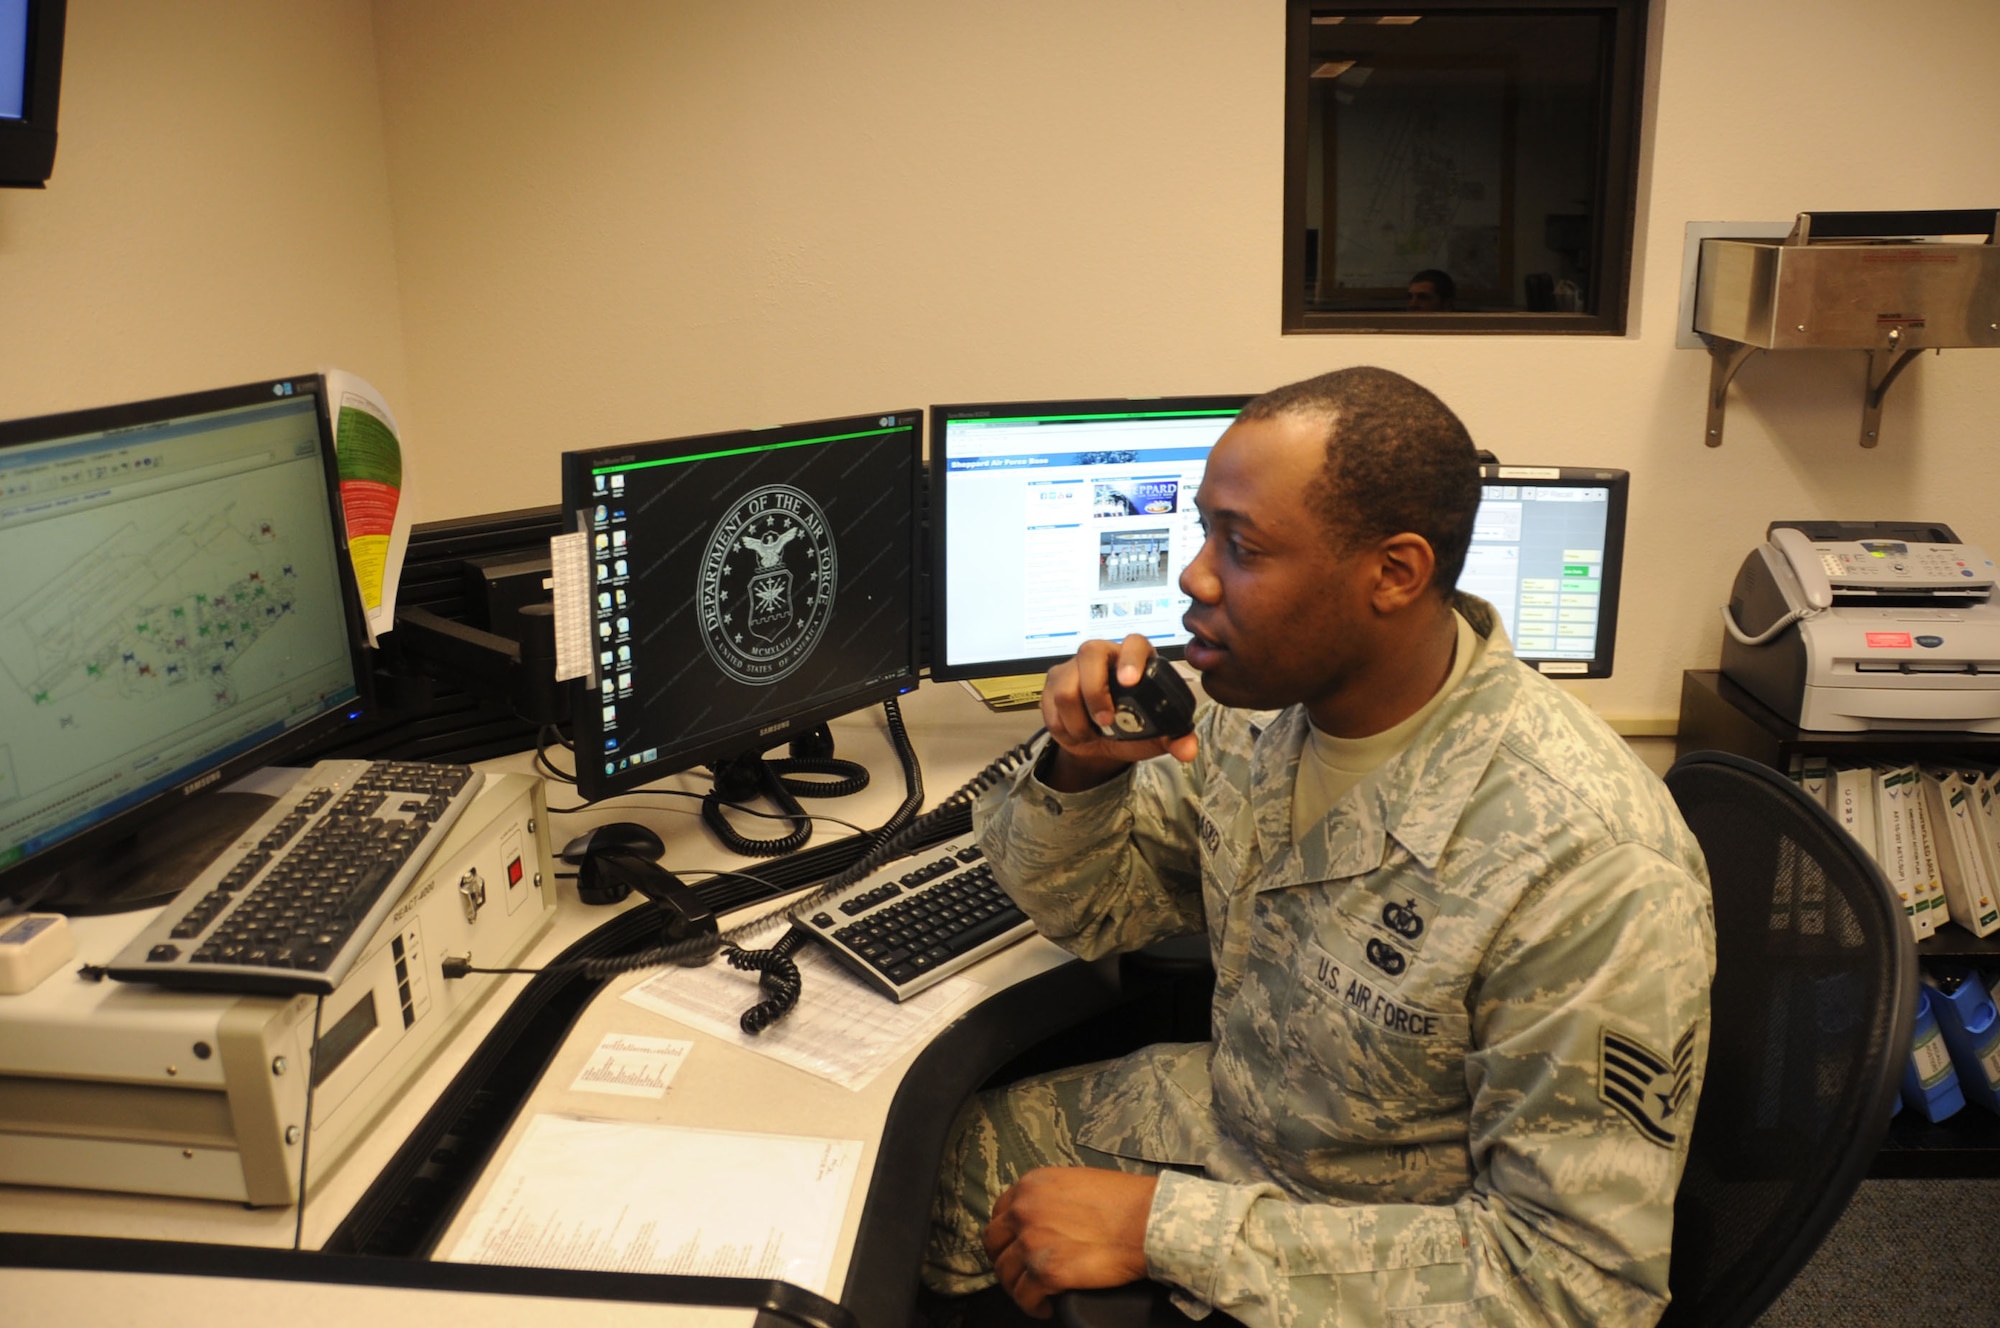 Staff Sgt. Greg Askew, 82nd Training Wing command post controller, makes a "Giant Voice" recording at Sheppard Air Force Base, Texas, April 18, 2013.  Askew was recently named the 2012 Air Education and Training Command NCO of the Year for the command post career field.  (U.S. Air Force photo/Dan Hawkins) 